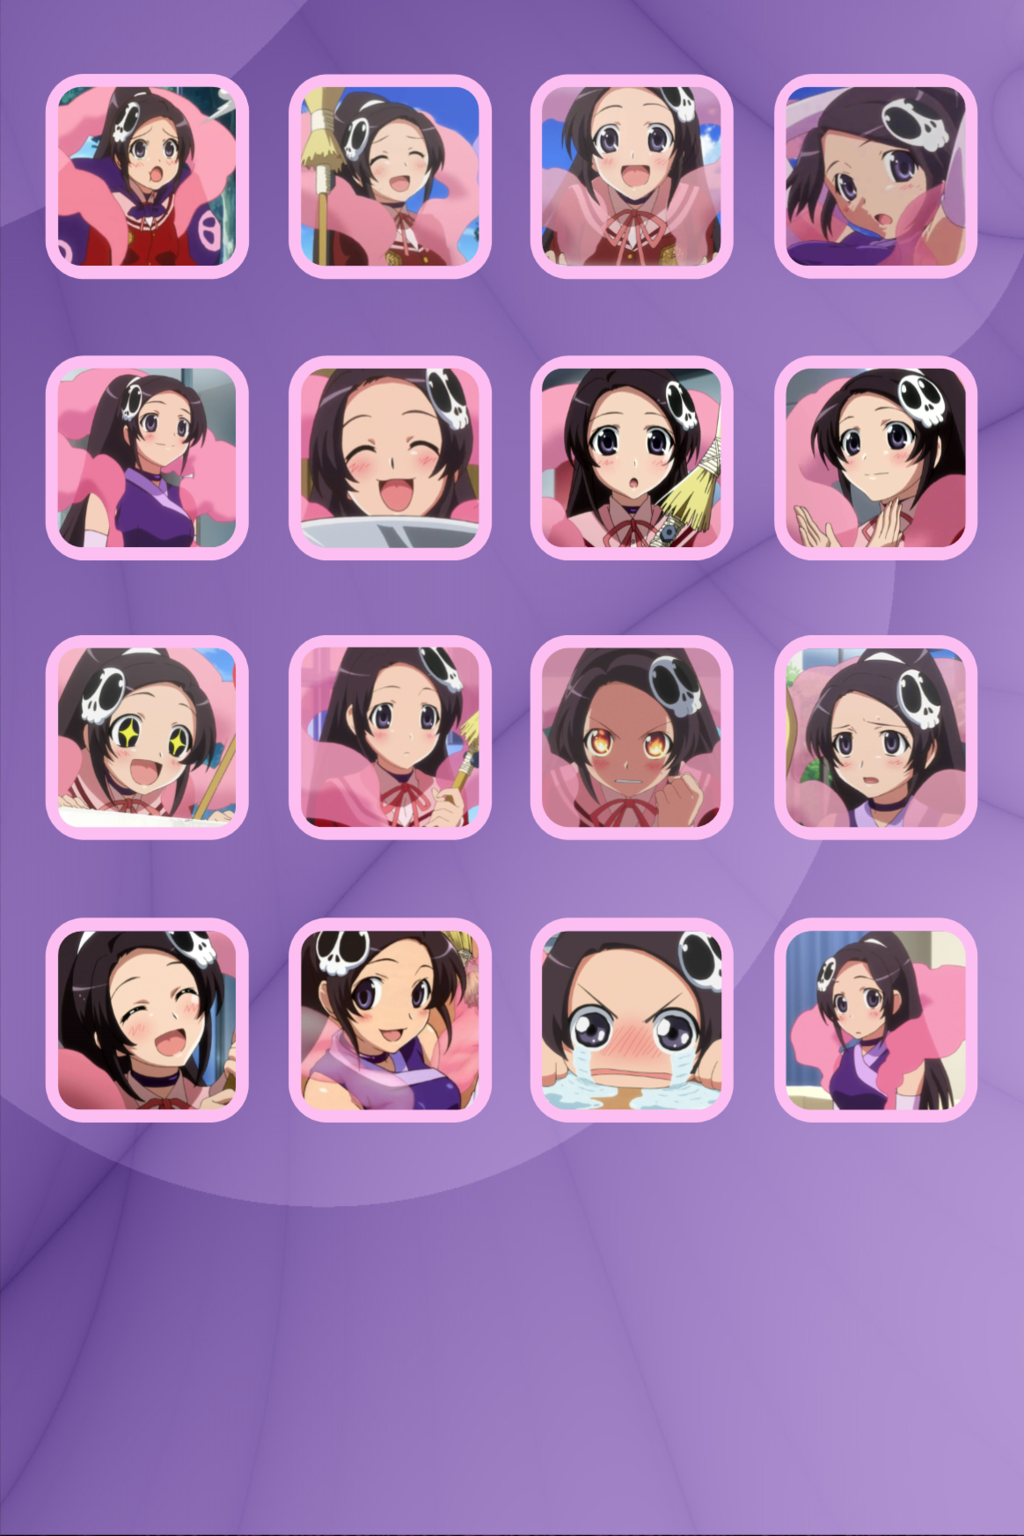 The world god only knows - Elsie Ipod wallpaper by QuarianDerpy on ...